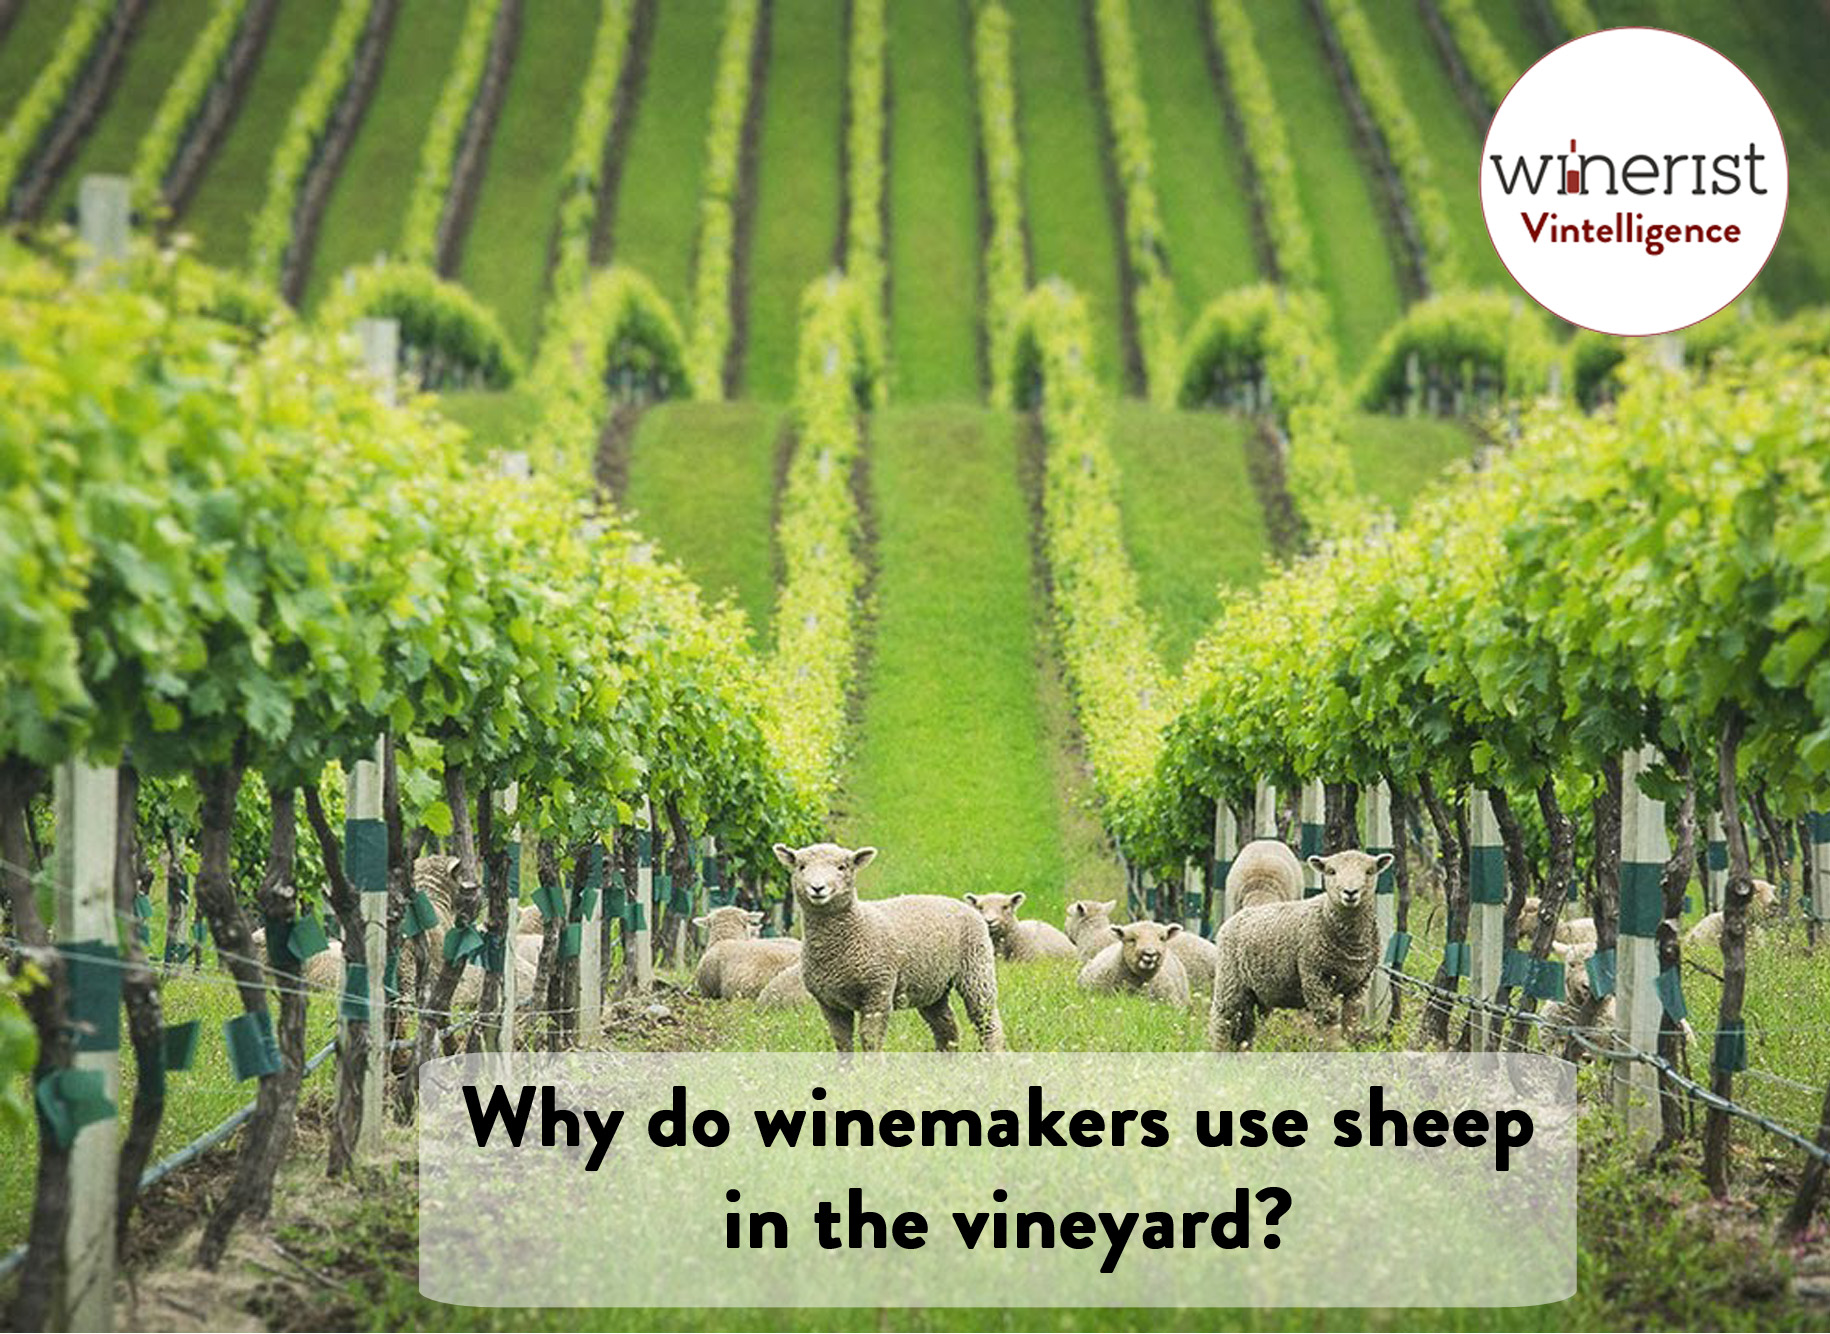 Why do winemakers use sheep in the vineyard?